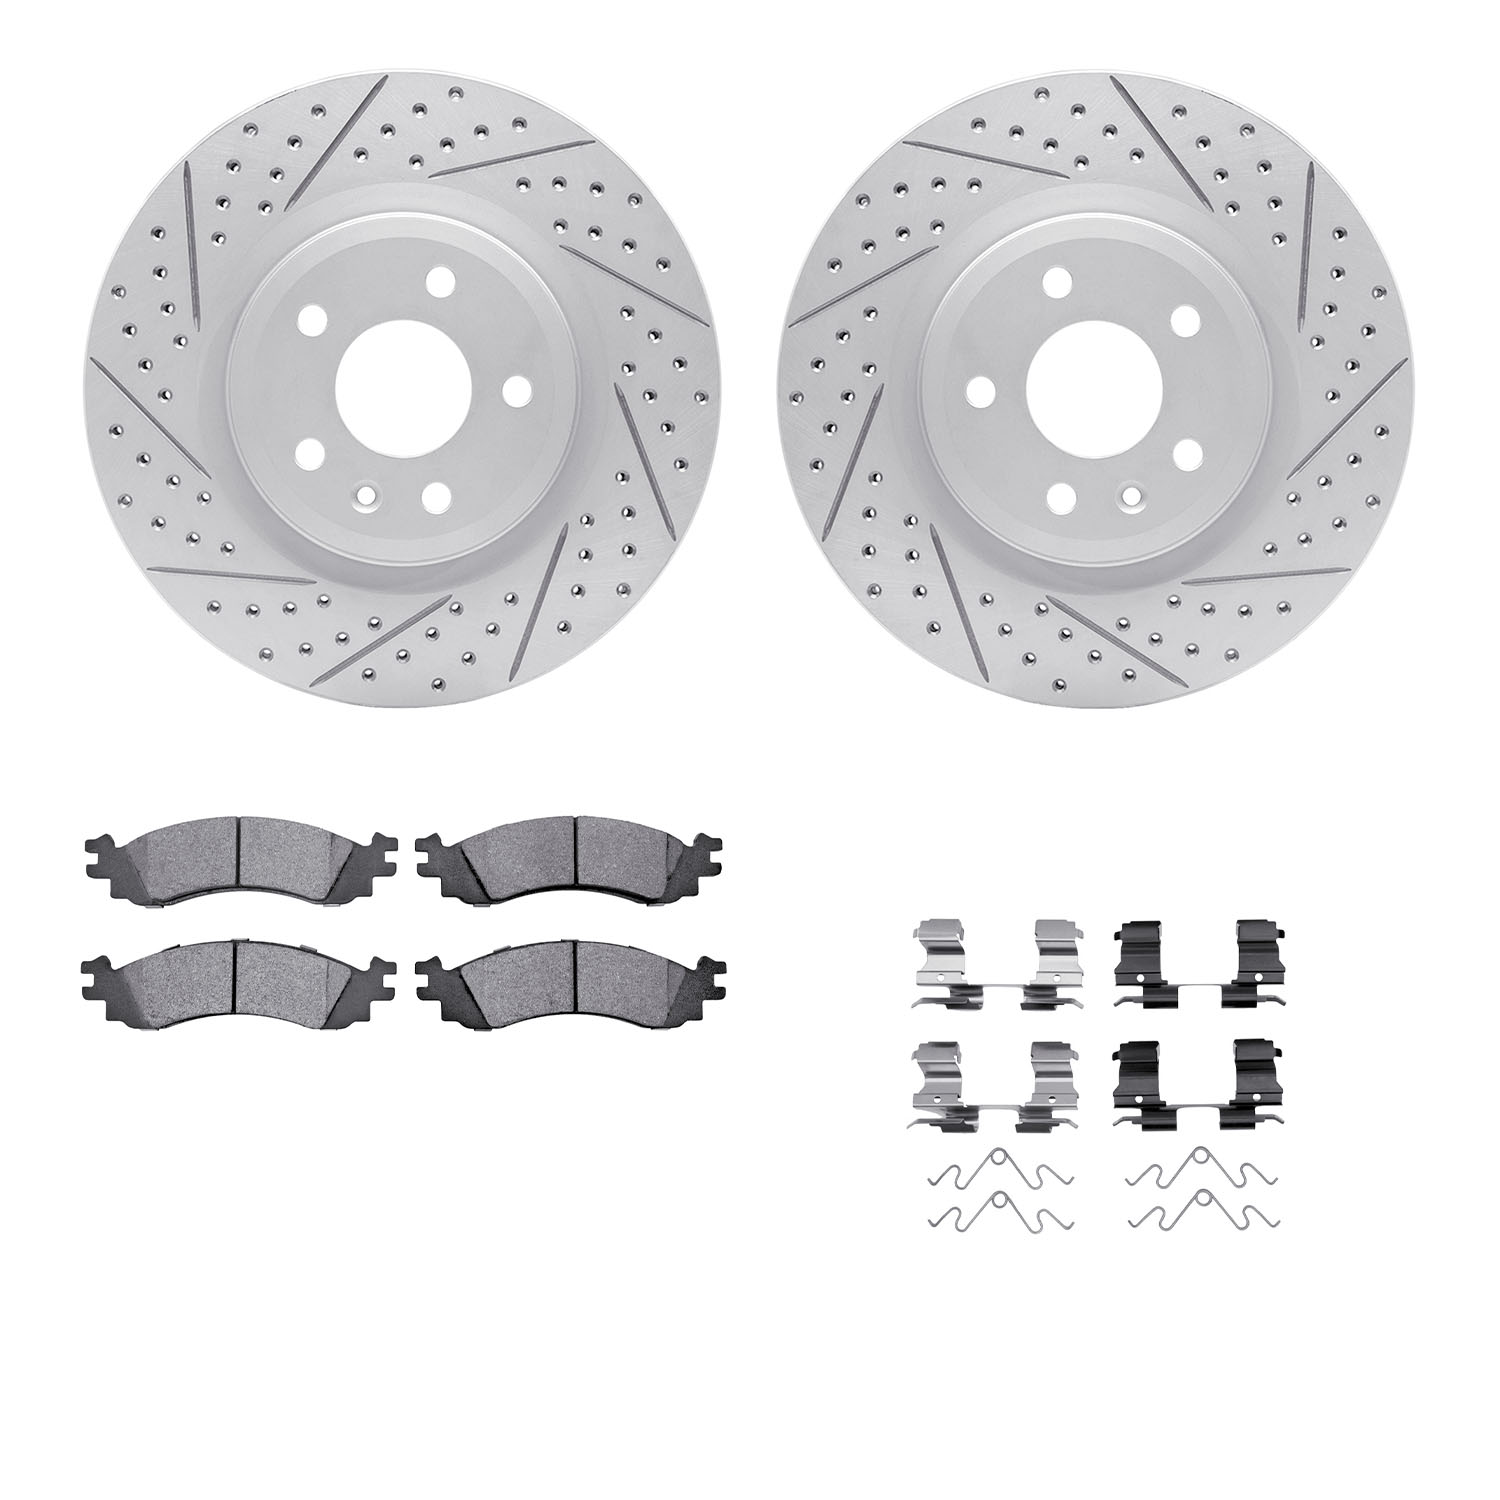 2212-54004 Geoperformance Drilled/Slotted Rotors w/Heavy-Duty Pads Kit & Hardware, 2011-2012 Ford/Lincoln/Mercury/Mazda, Positio